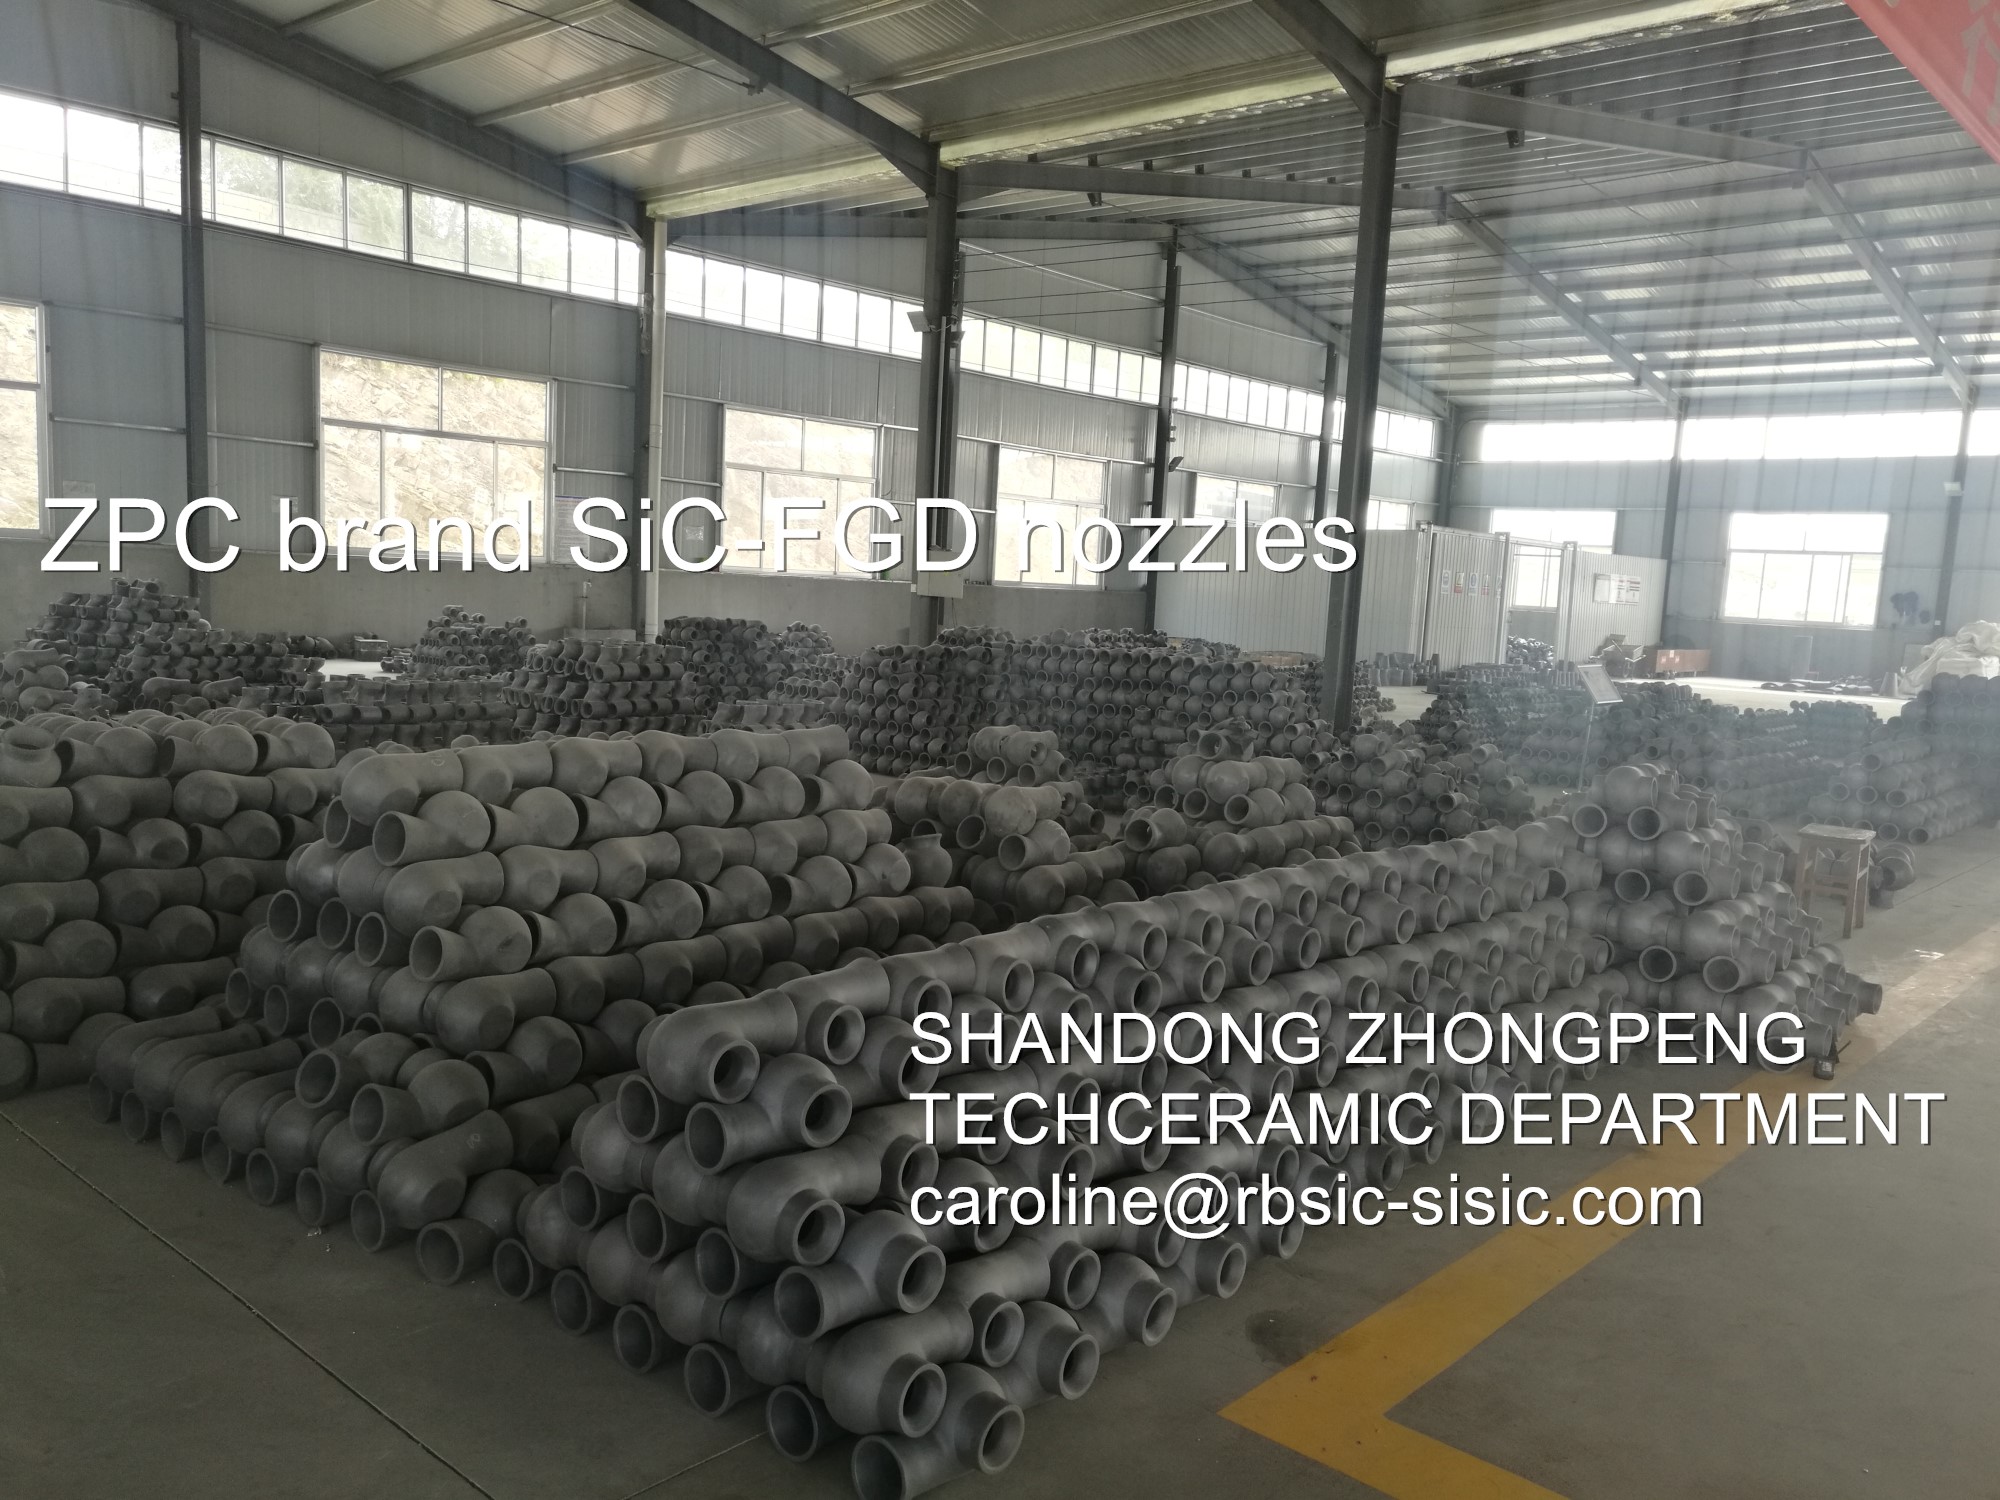 Silicon Carbide FGD nozzles factory Featured Image